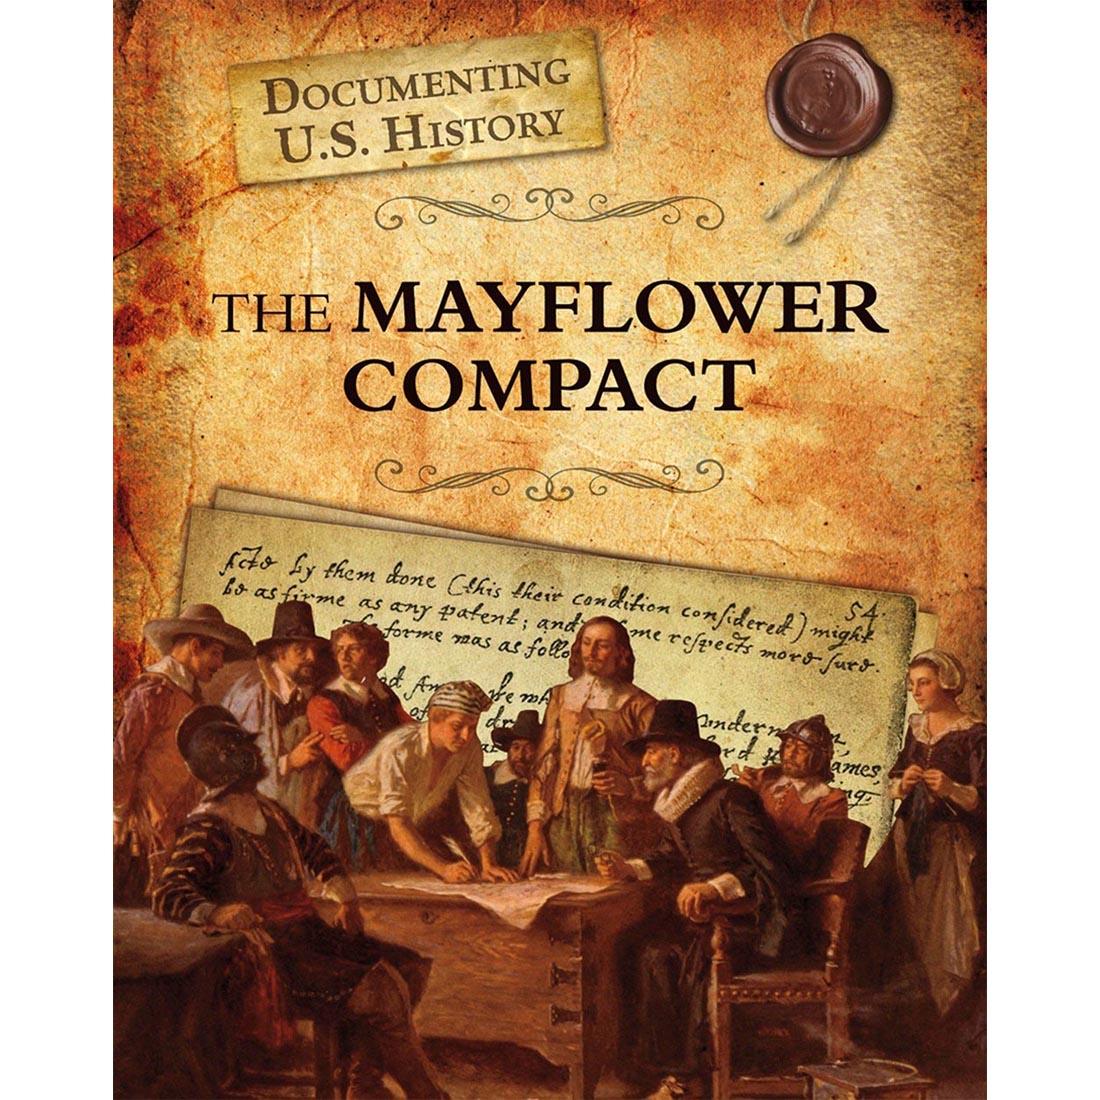 Documenting U.S. History: The Mayflower Compact